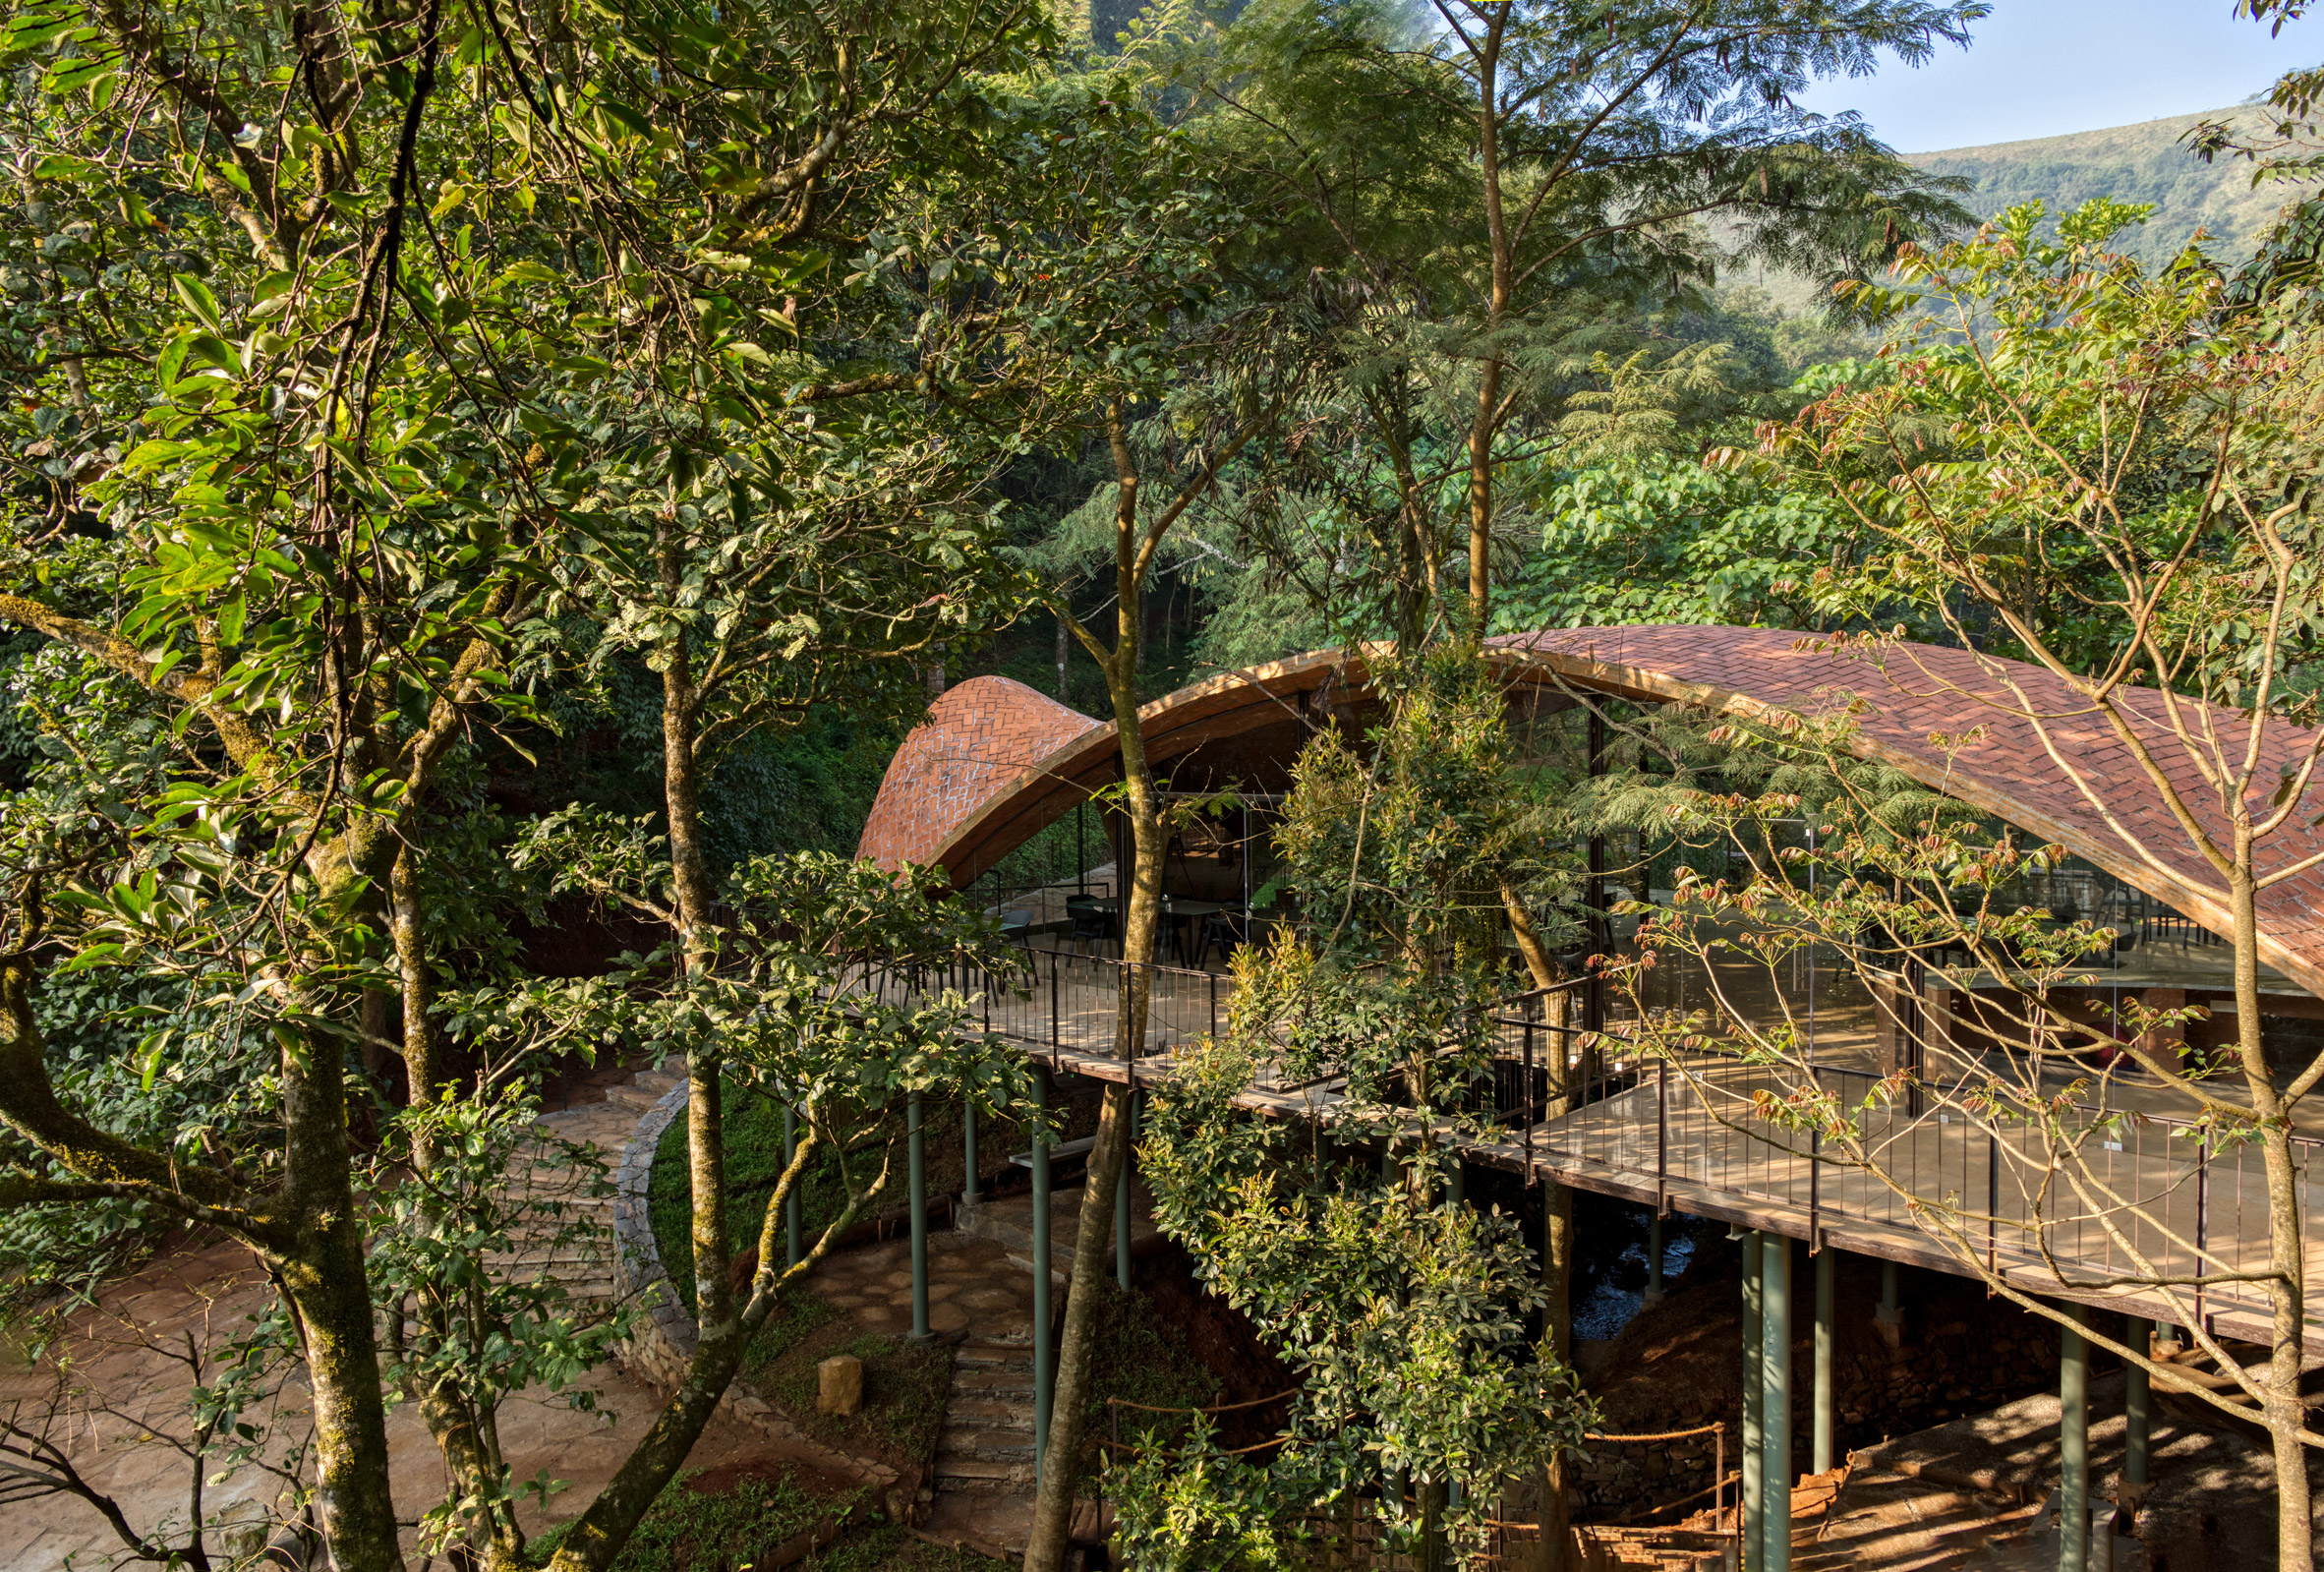 Vaulted tile roof over restaurant on deck in forest in India